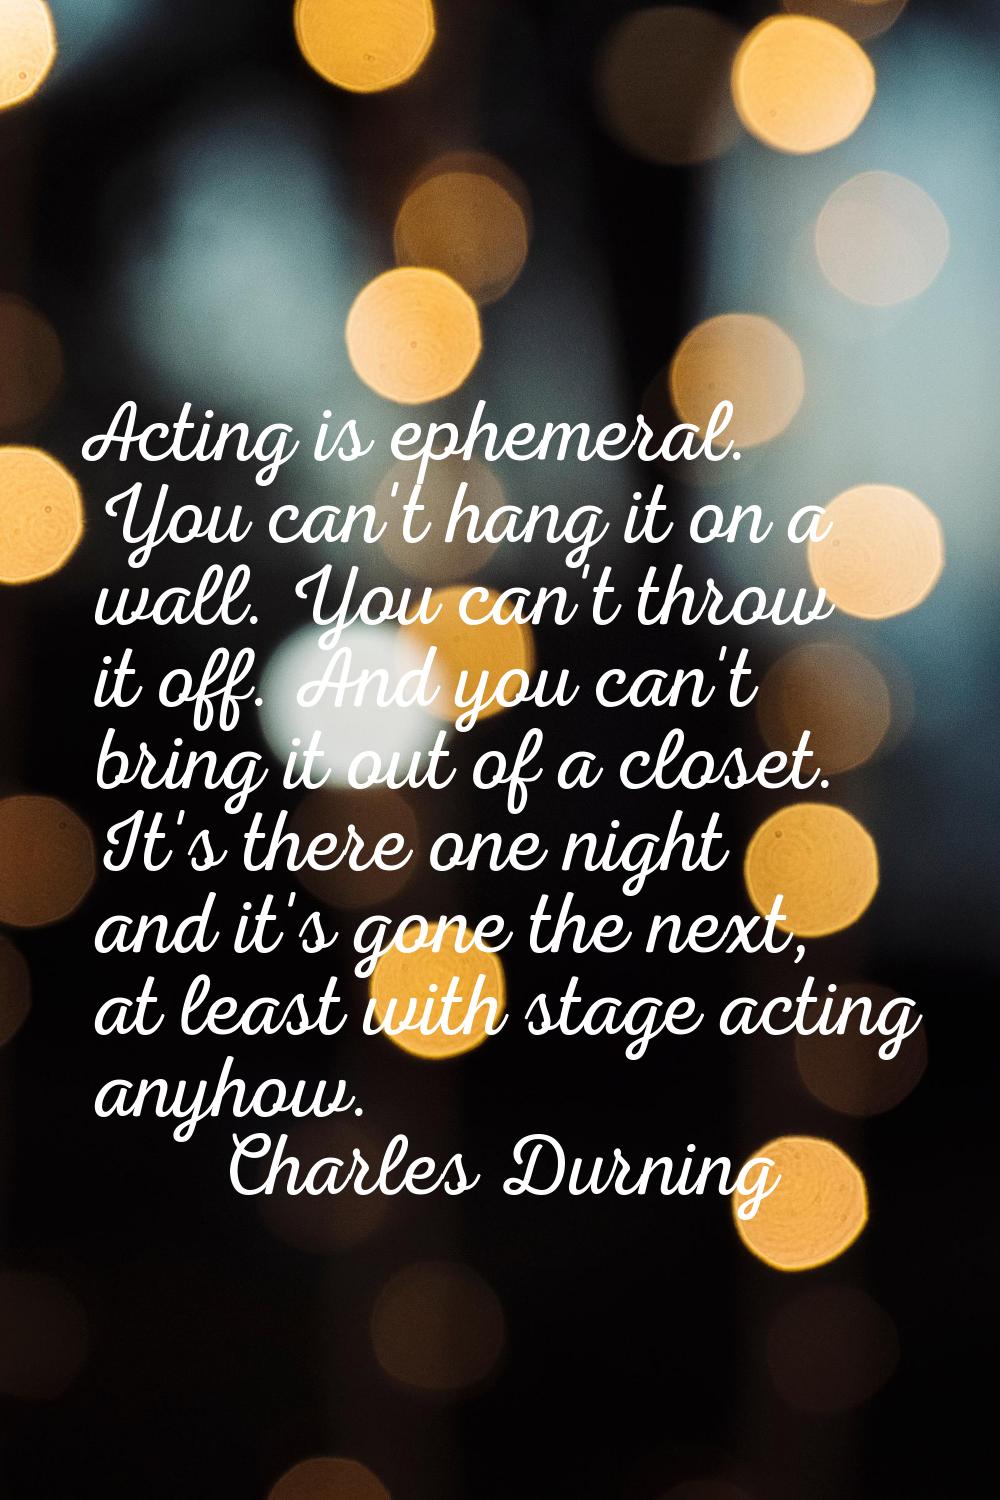 Acting is ephemeral. You can't hang it on a wall. You can't throw it off. And you can't bring it ou